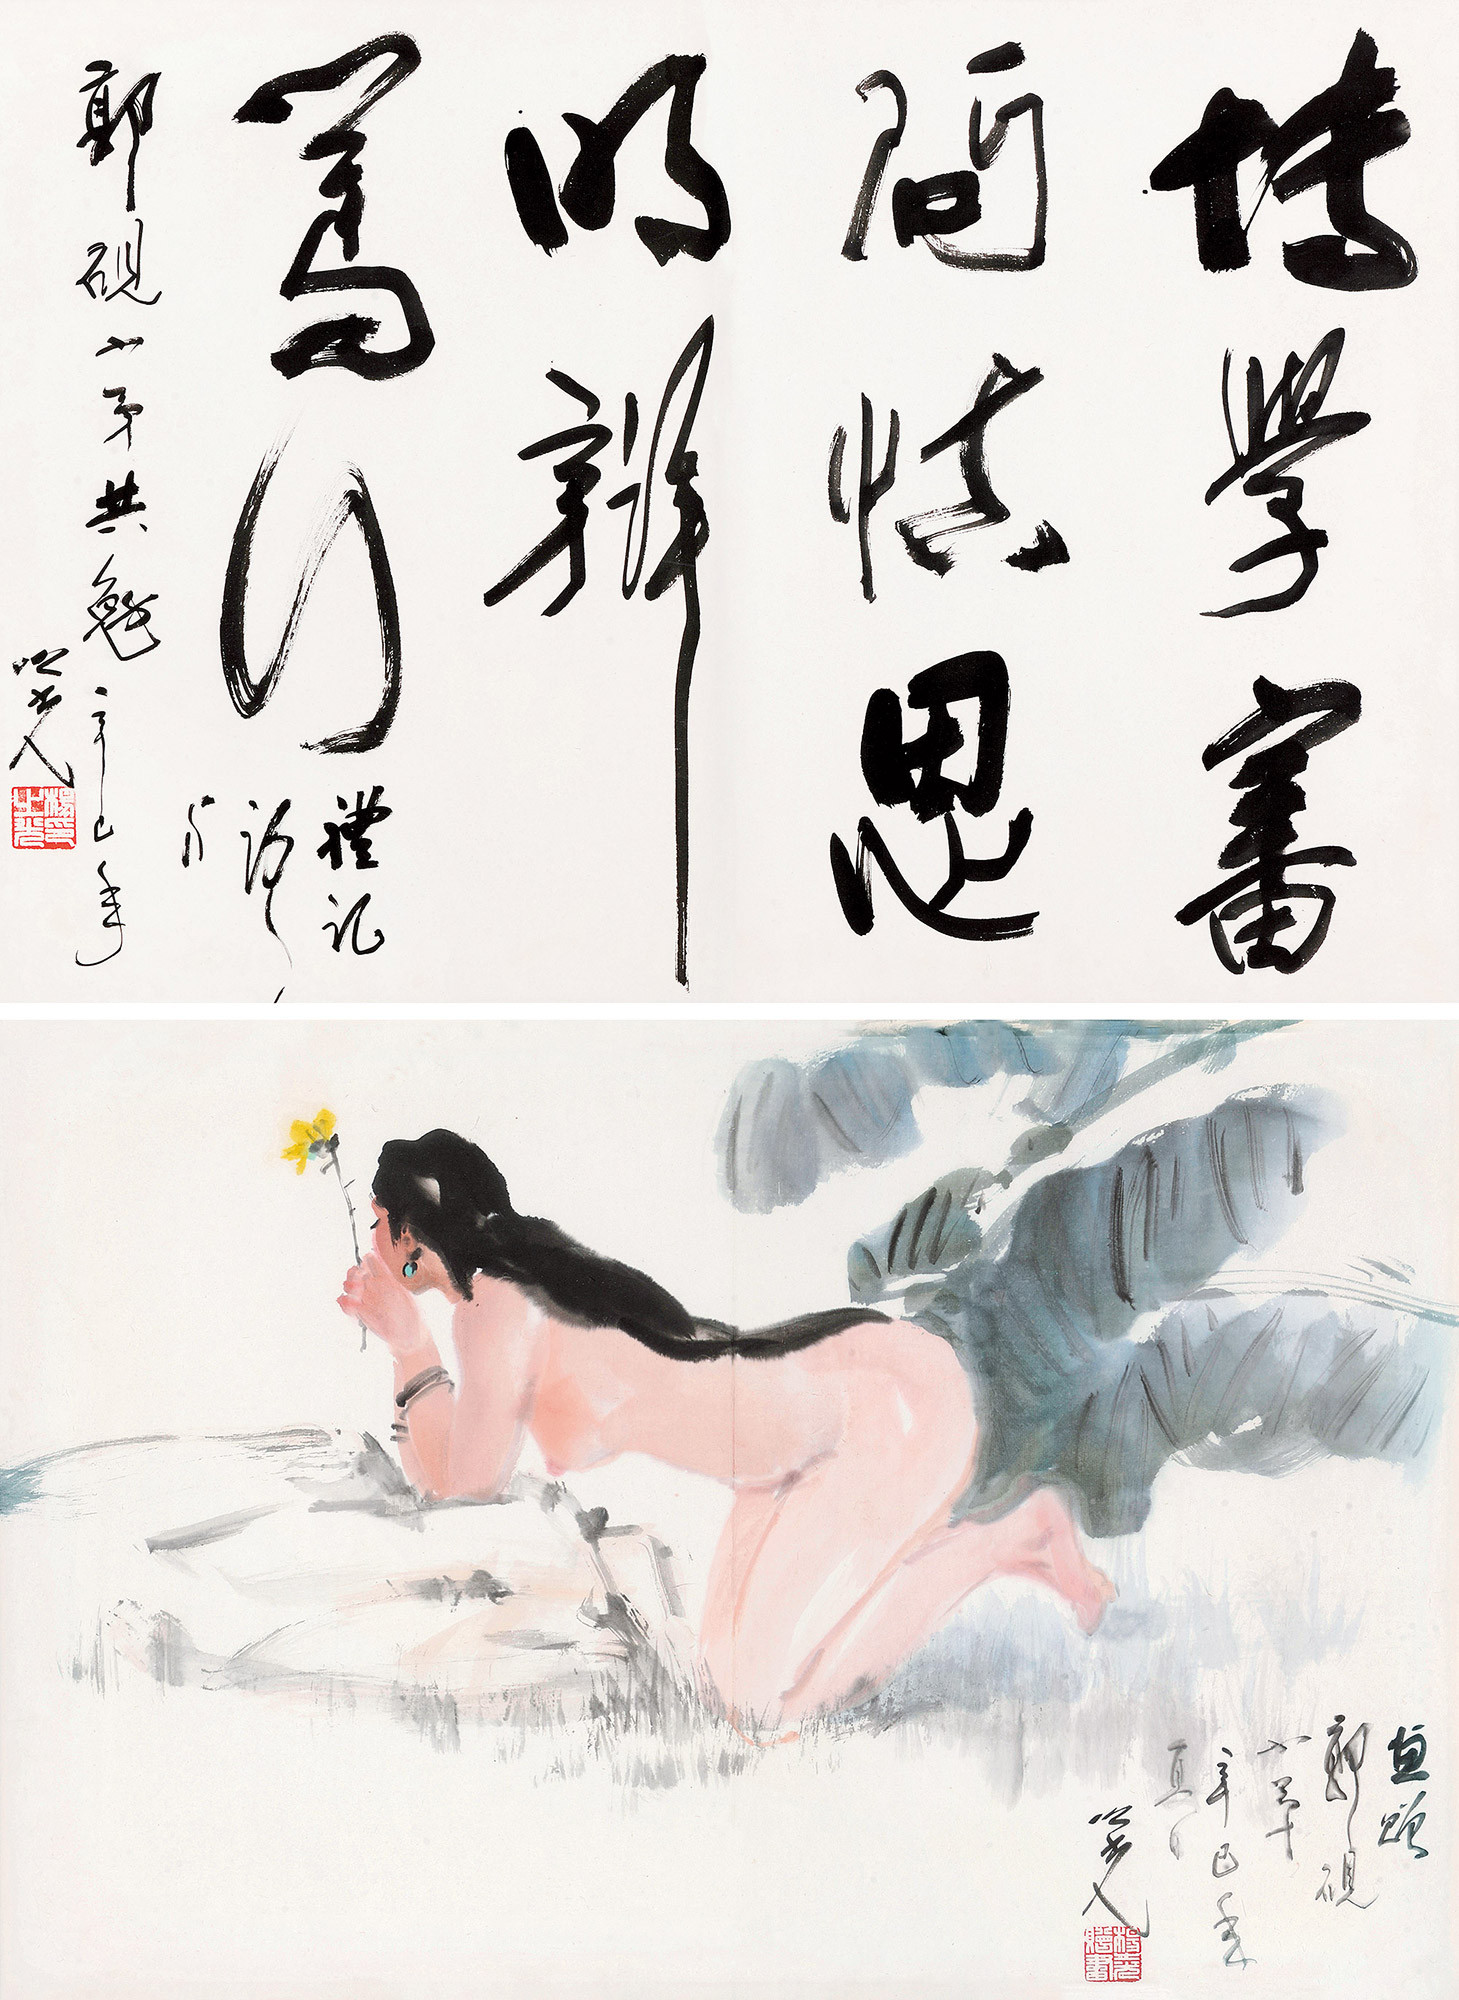 BEAUTY AND CALLIGRAPHY